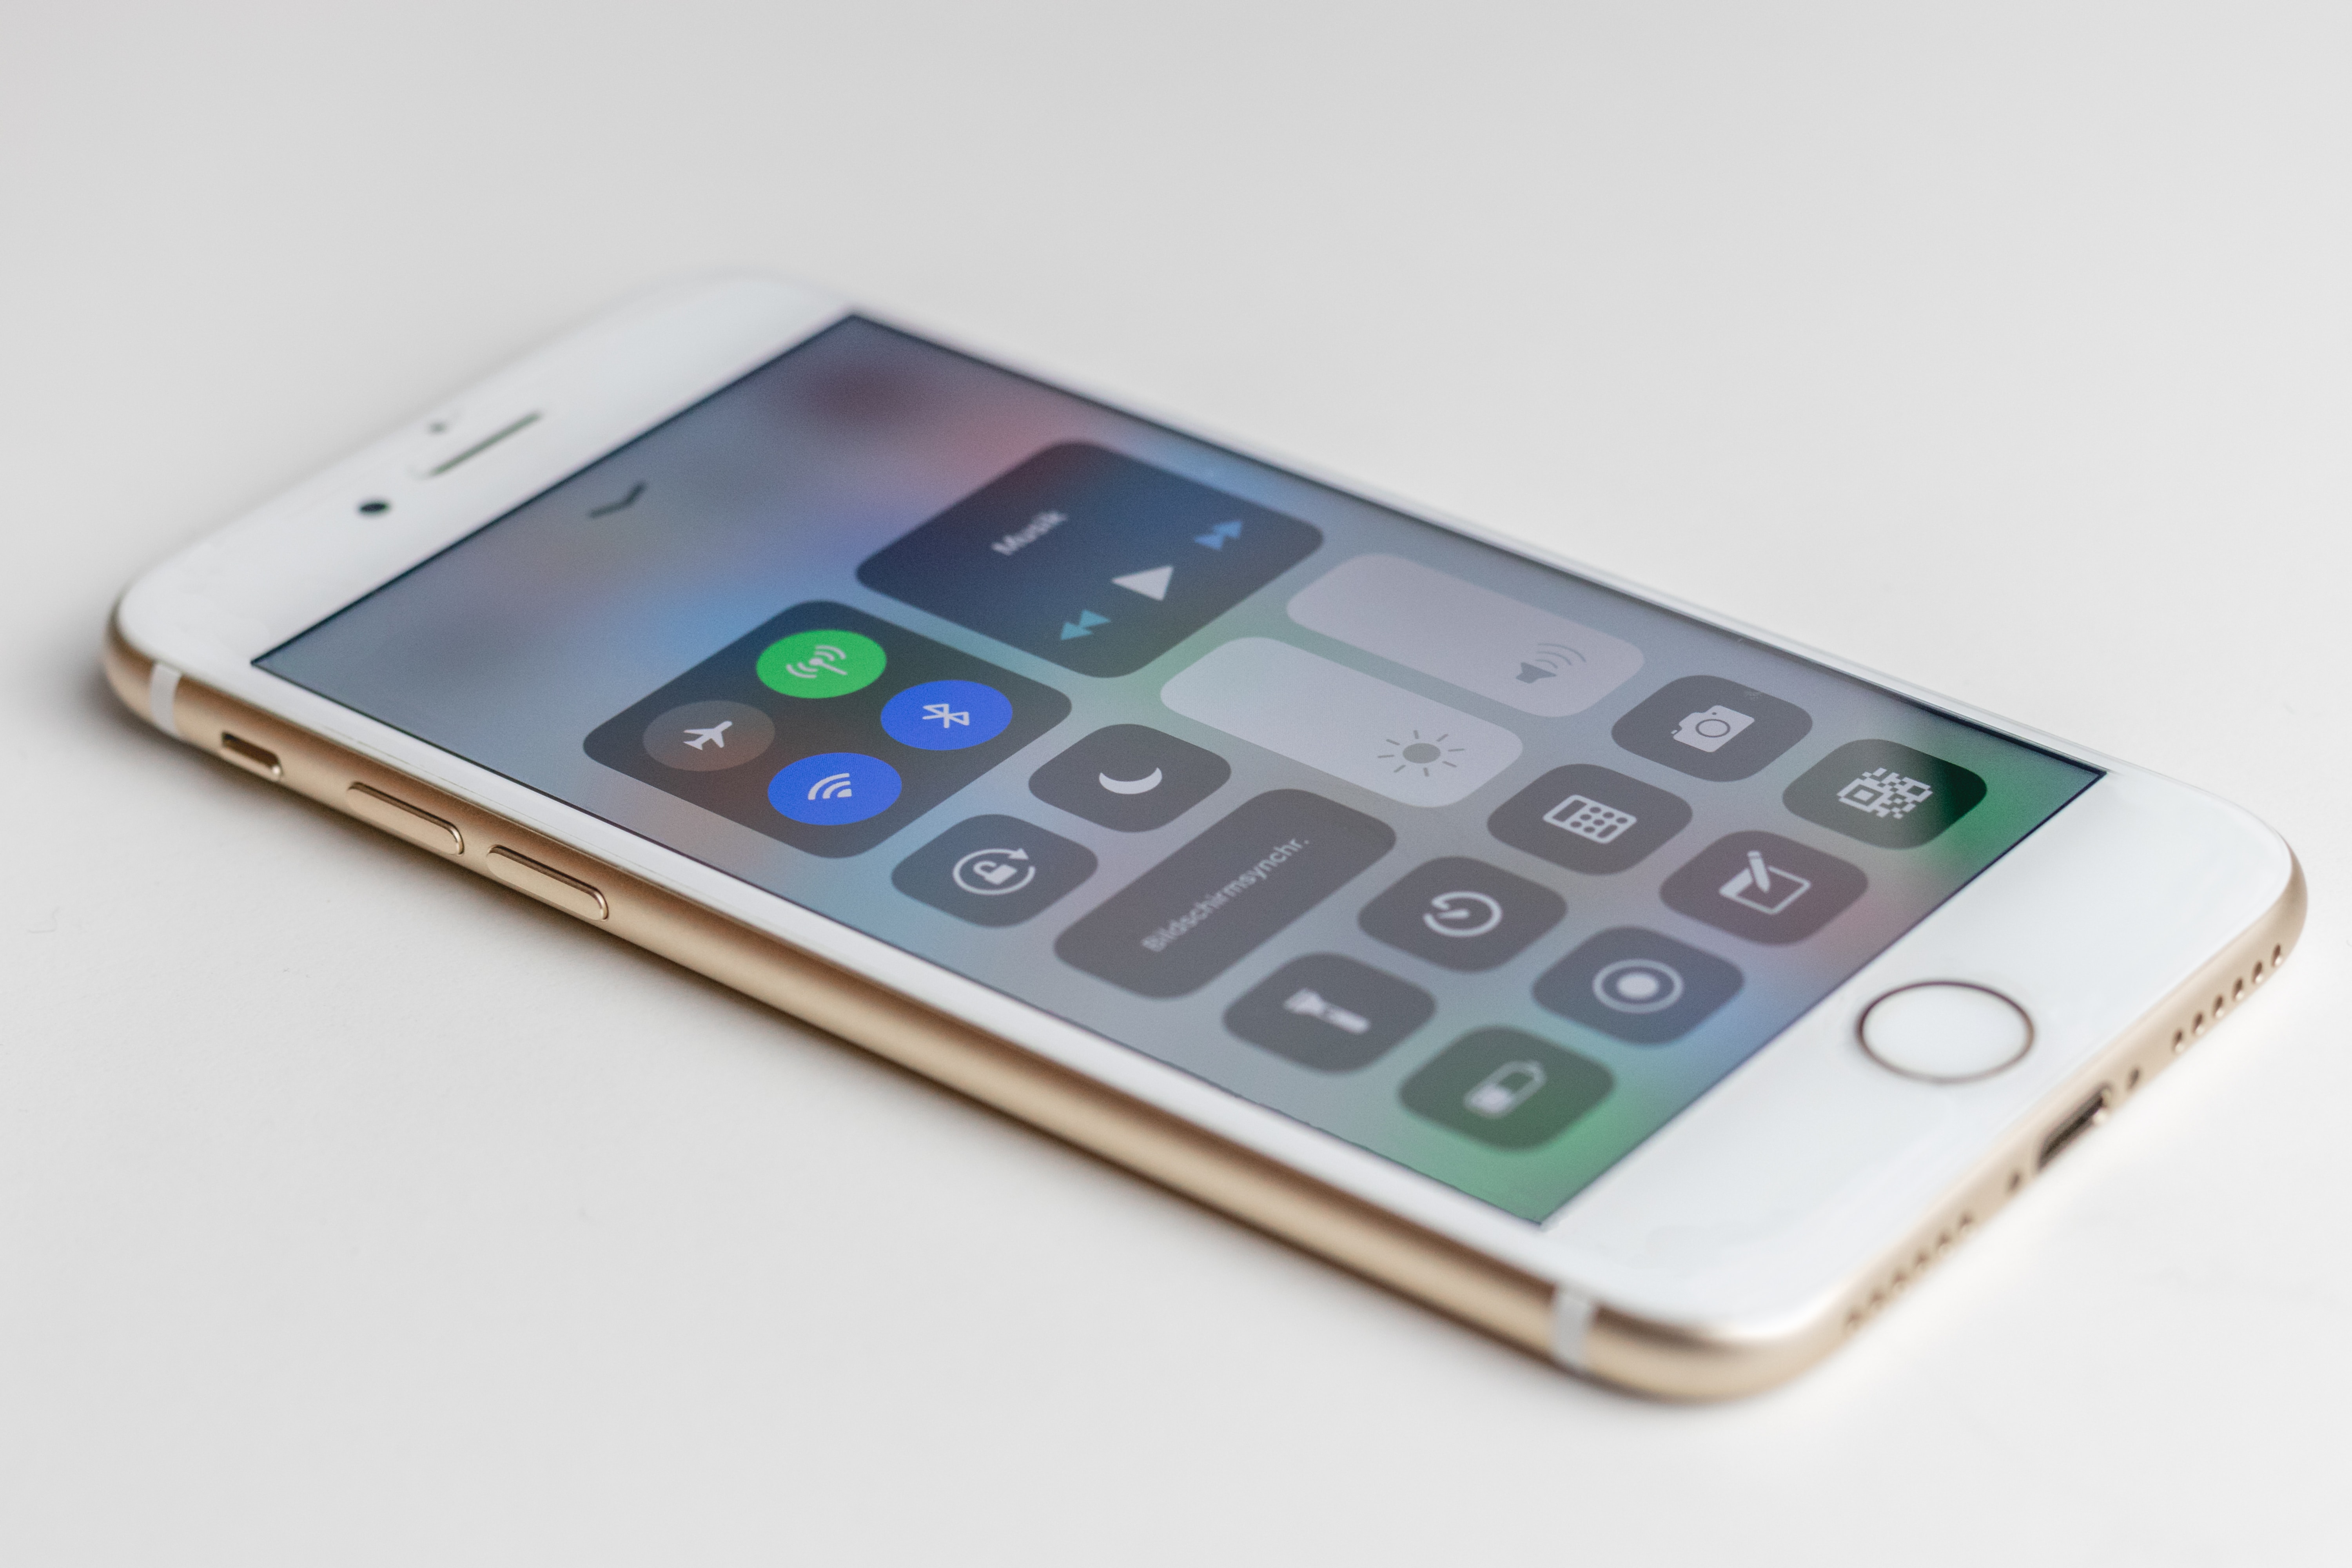 An iPhone 6 phone in gold. On the screen the settings, including Bluetooth options, are visible.